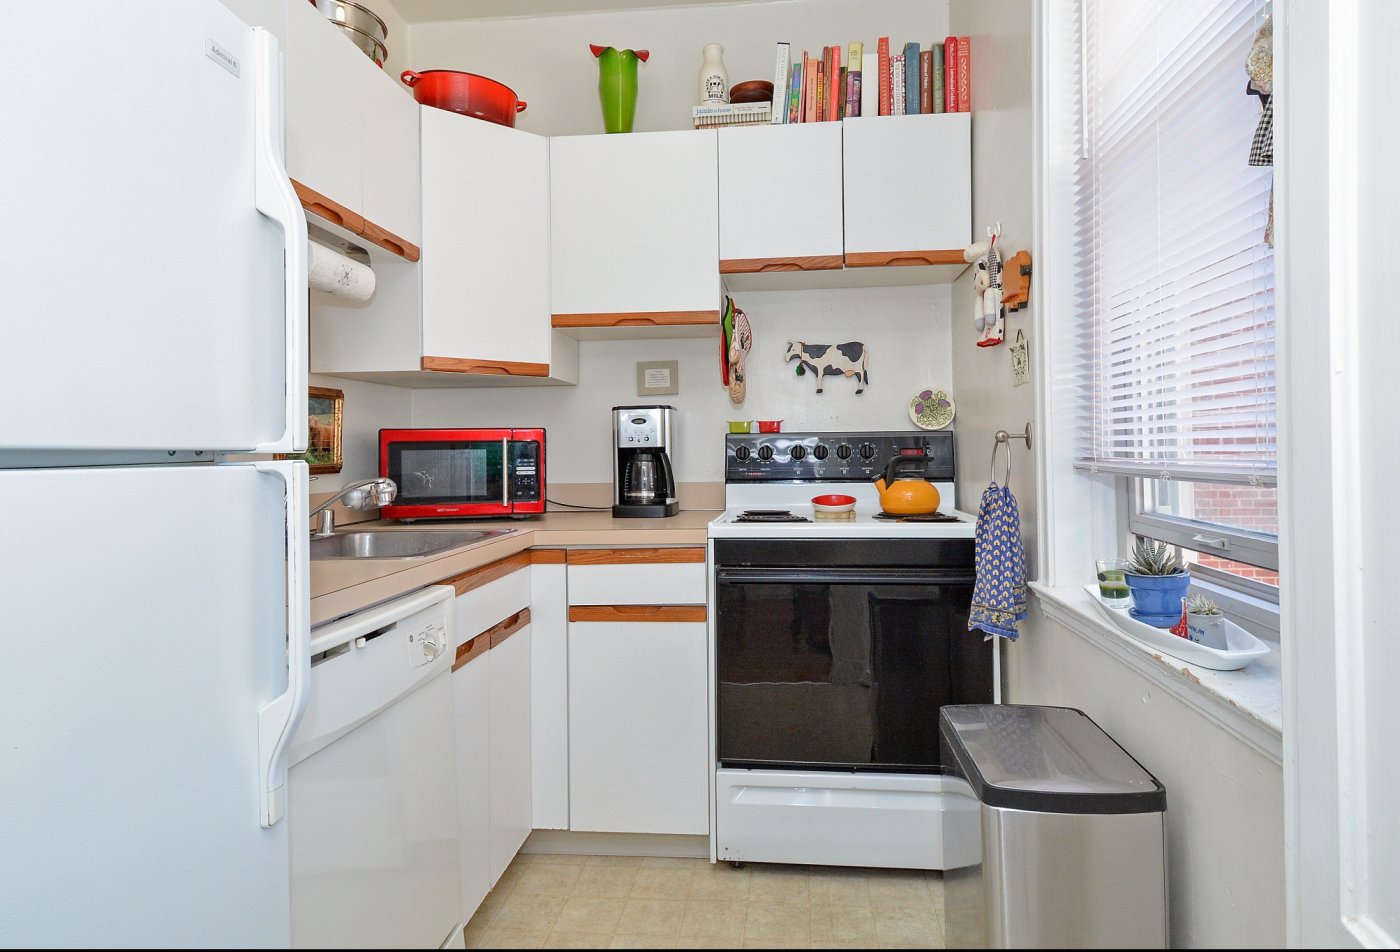 State-of-the-Art Kitchen | Wilmington DE Apartment Homes | Gilpin Place Apartments